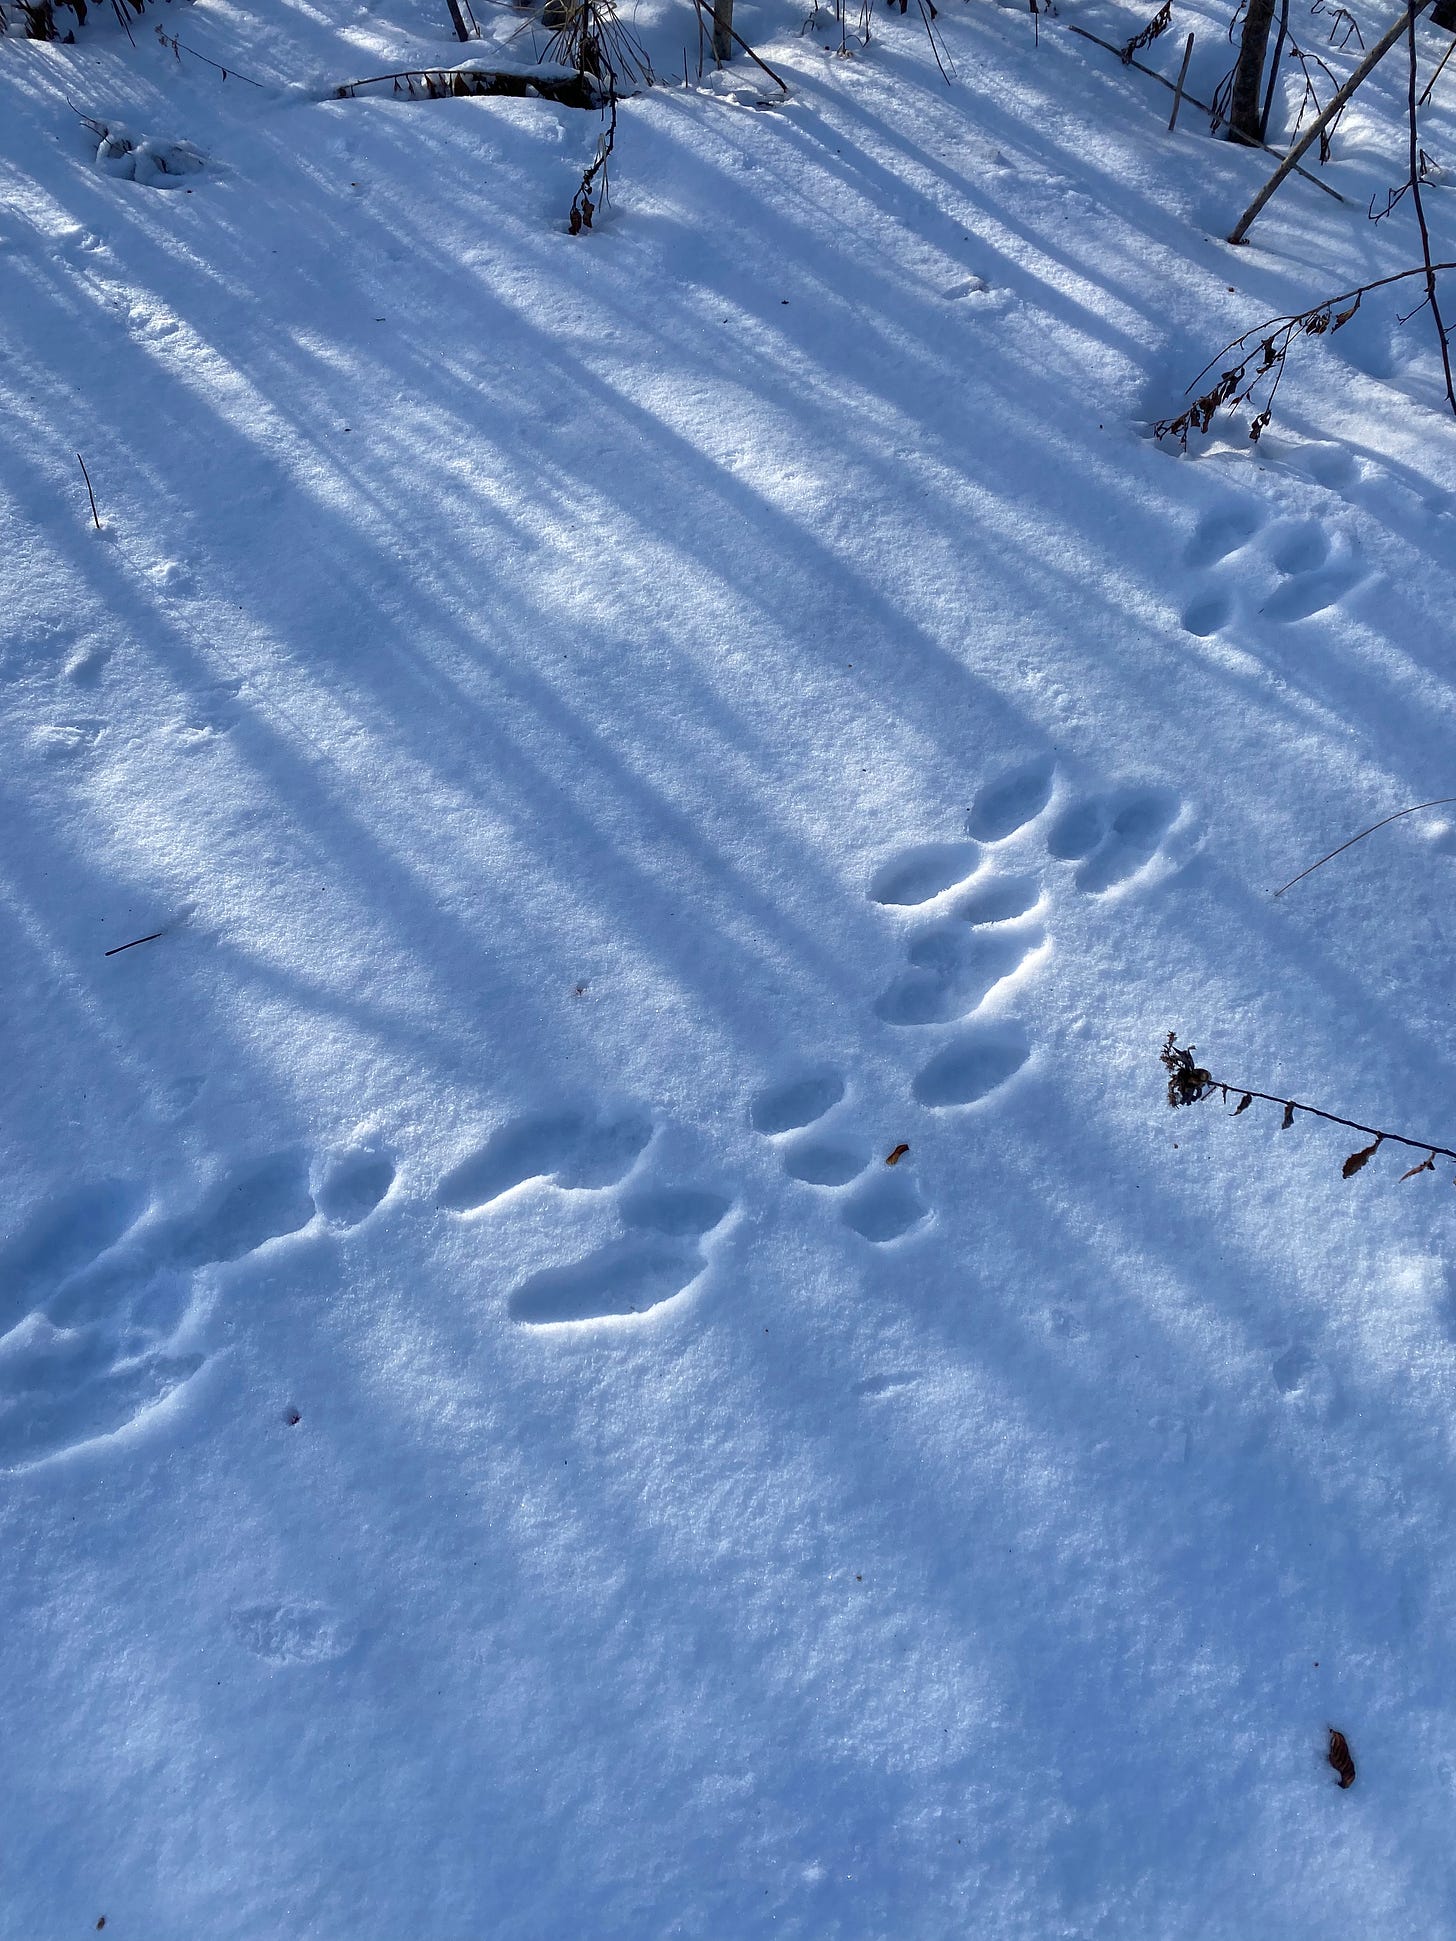 A trail of small animal footprints through the snow.